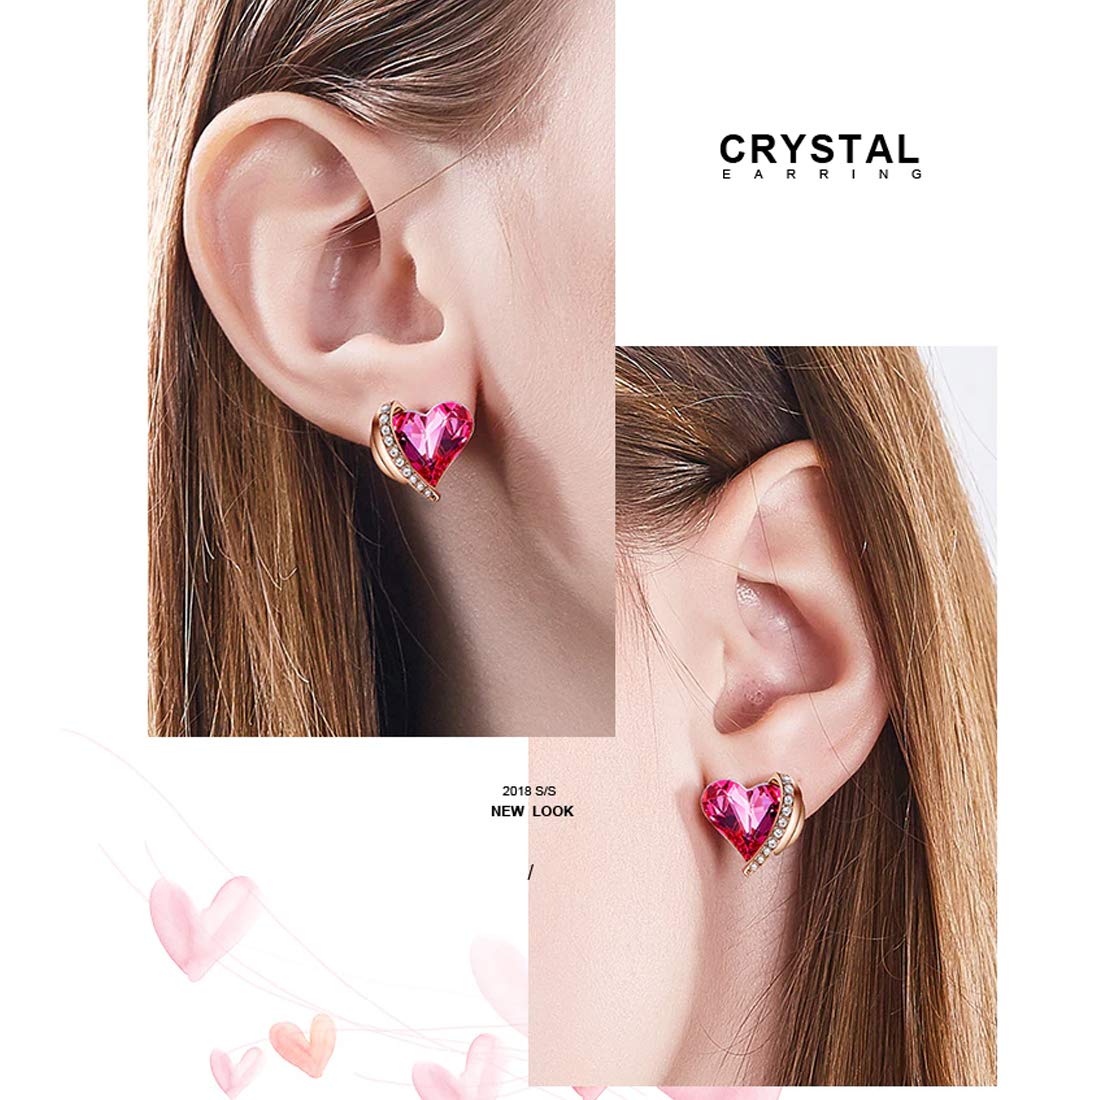 Yellow Chimes Earrings for Women & Girls Pink Crystals from Swarovski Studs | Rosegold Toned Valentines Special Love Heart Stud Earrings for Women | Birthday & Anniversary Gift